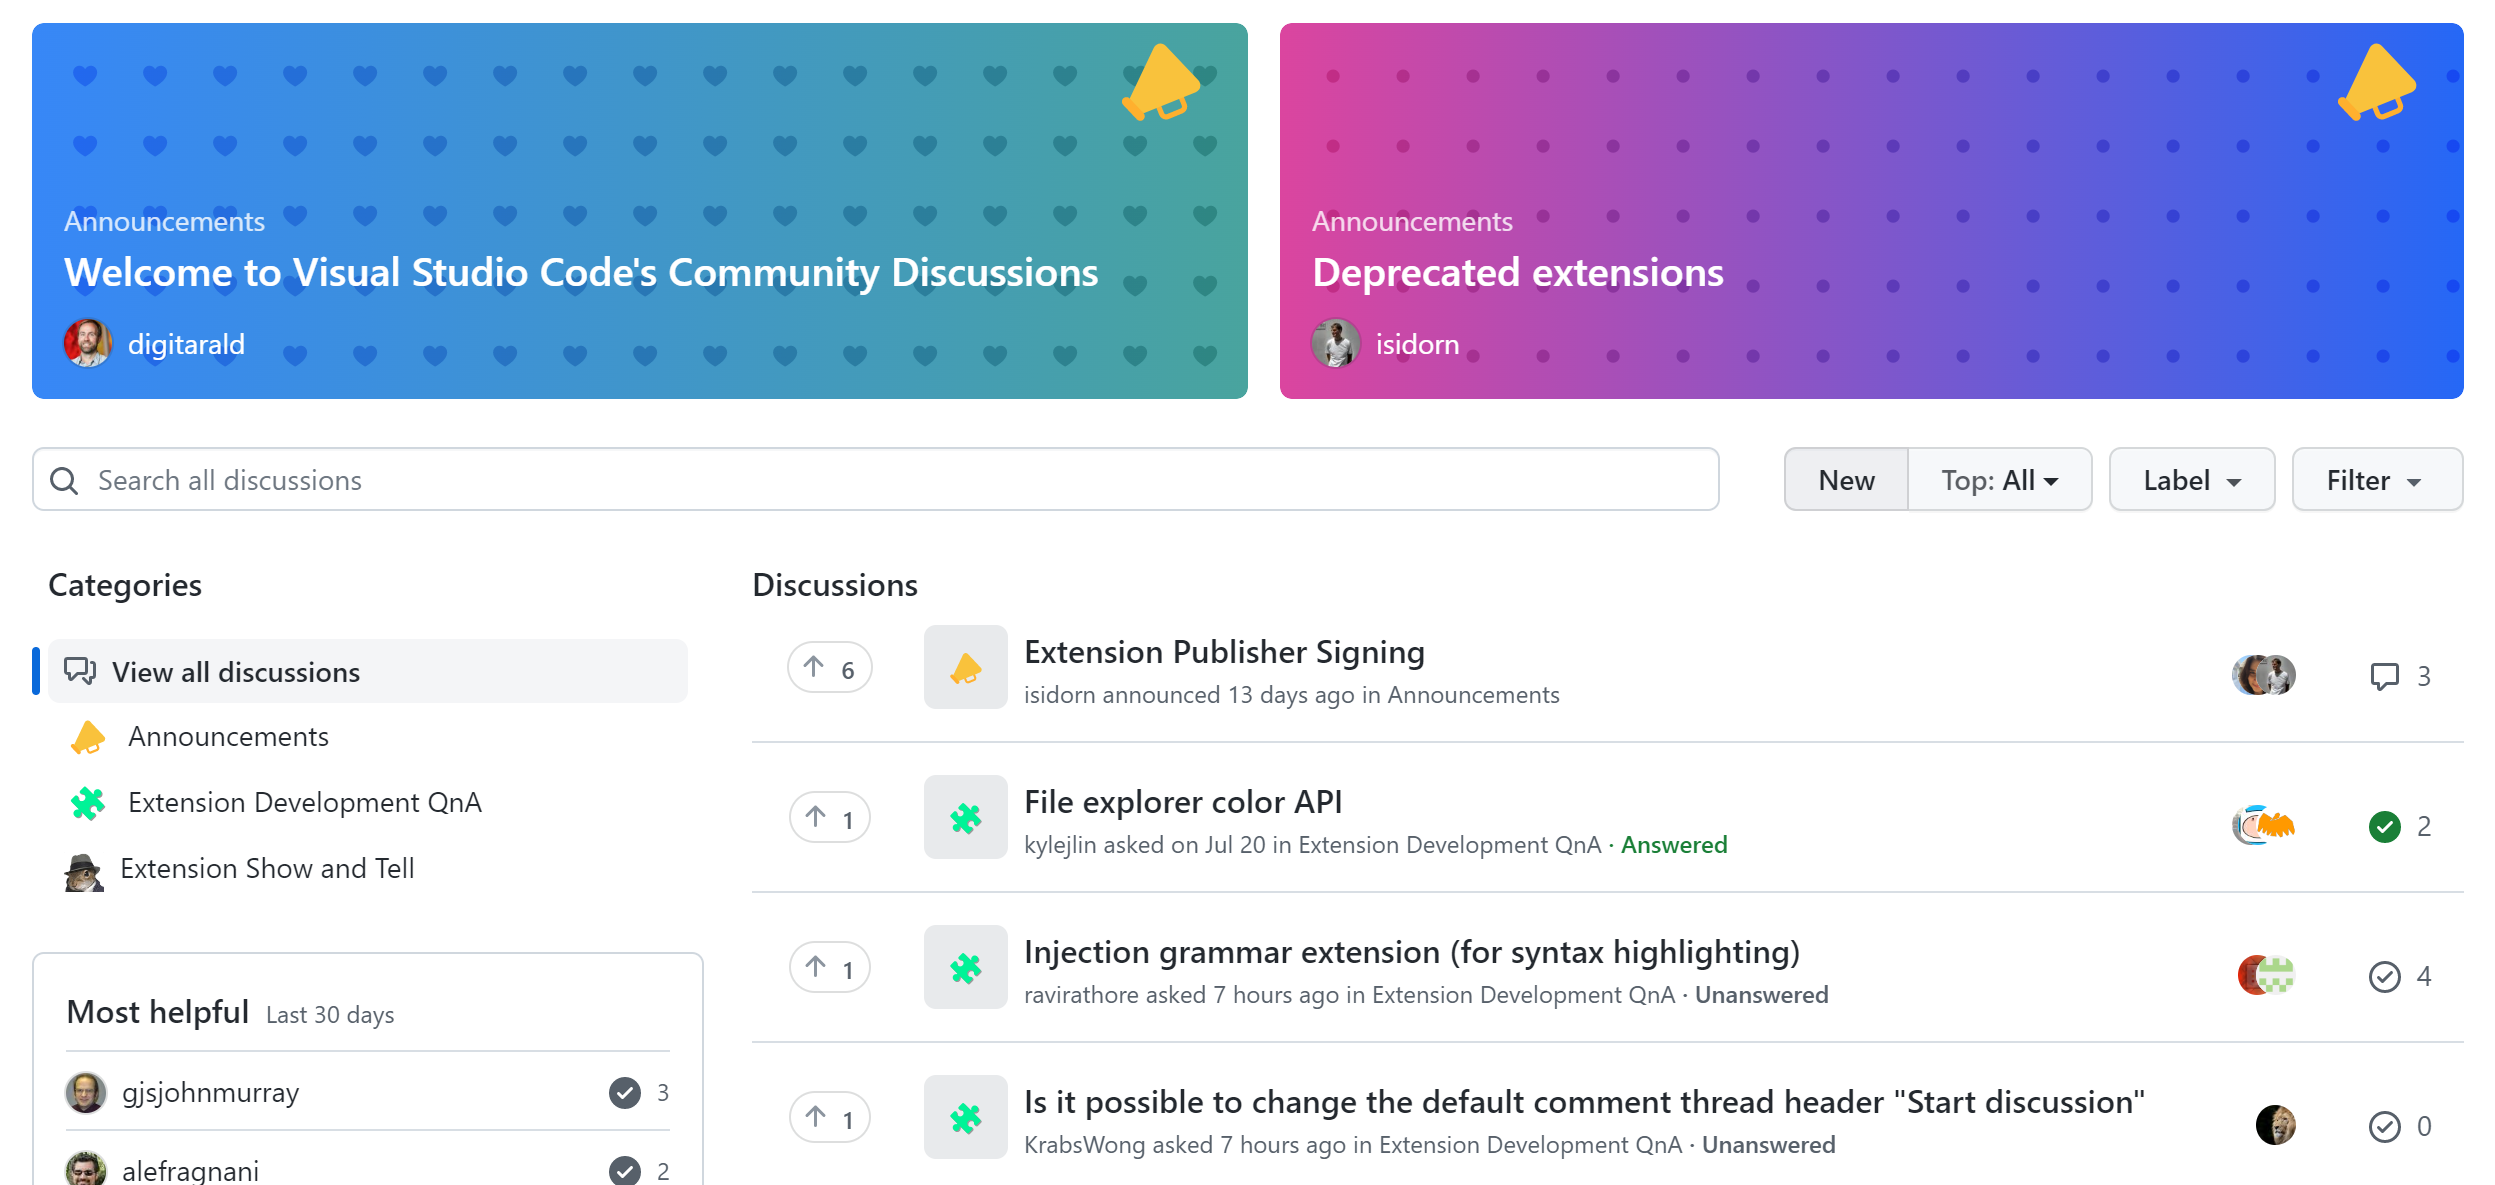 A screenshot showing the VS Code Community Discussions landing page